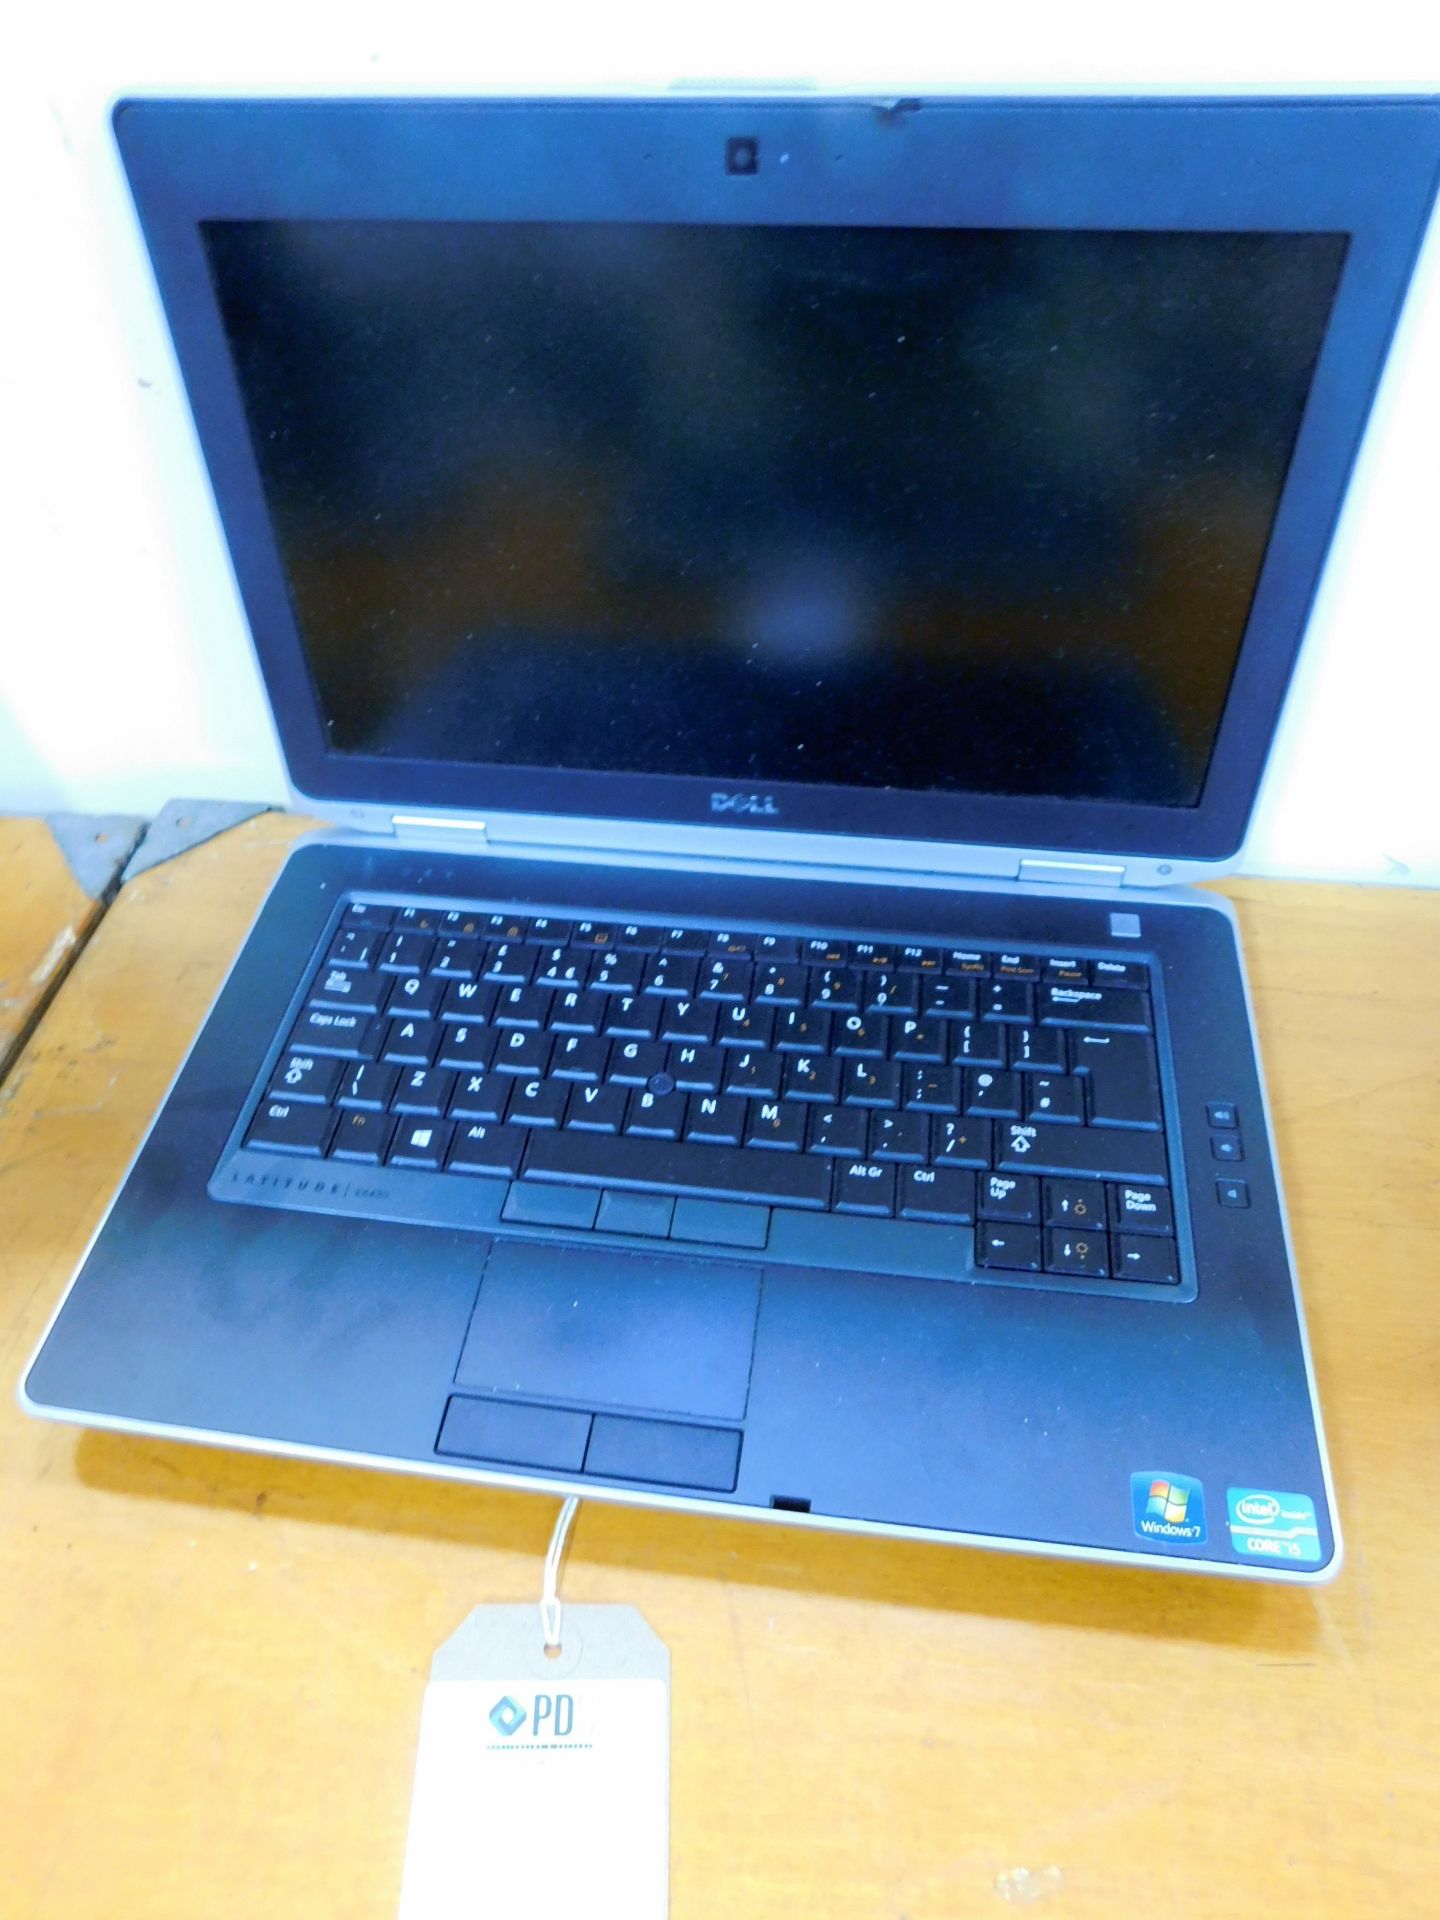 Dell Latitude E6430 Core I5 Laptop (No HDD) (Located Brentwood, See General Notes For More Details)